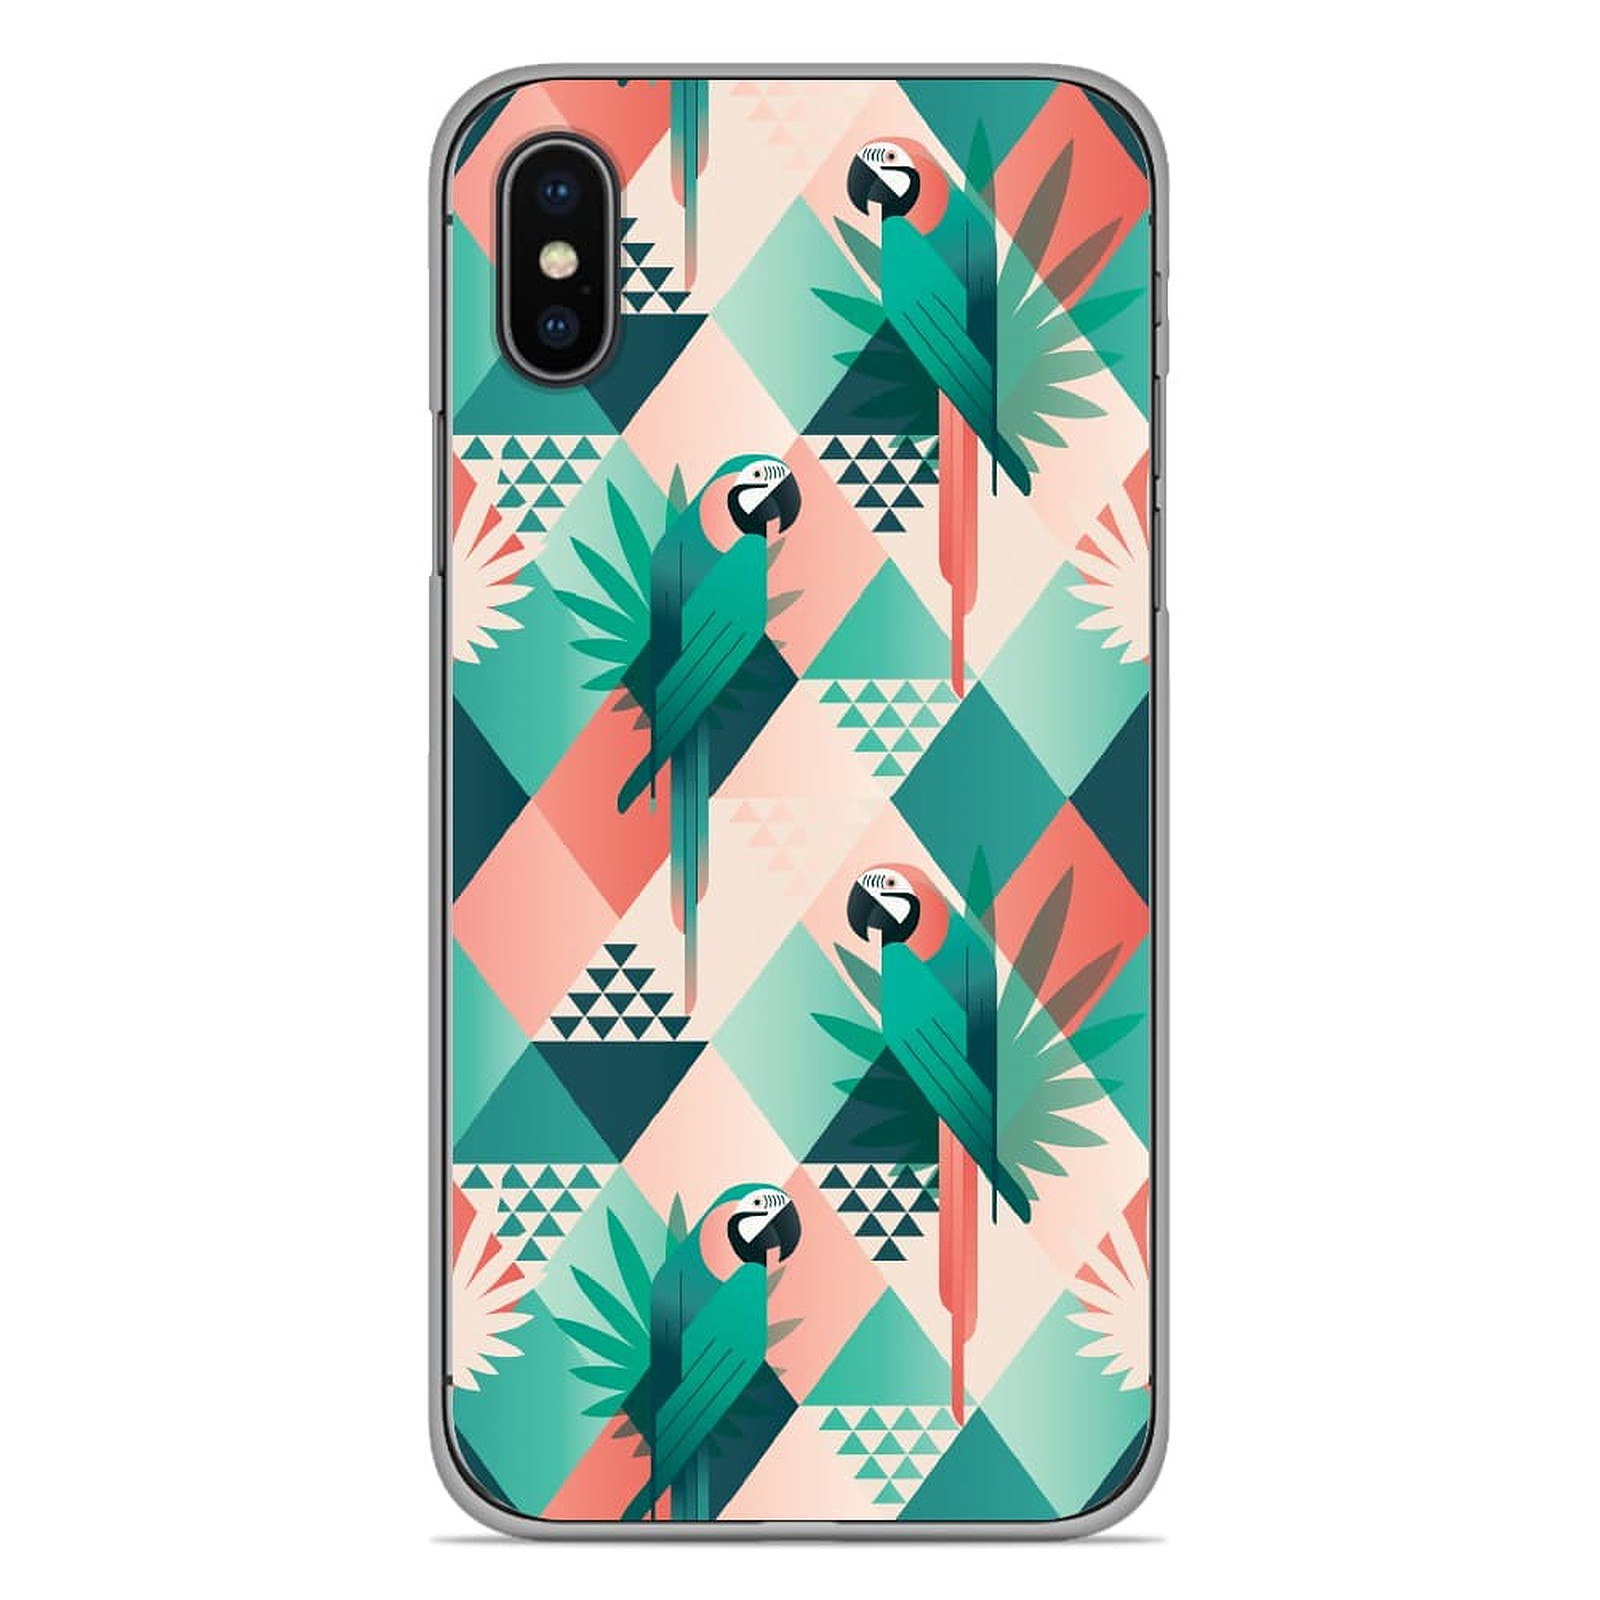 1001 Coques Coque silicone gel Apple iPhone XS Max motif Perroquet ge´ome´trique - Coque telephone 1001Coques